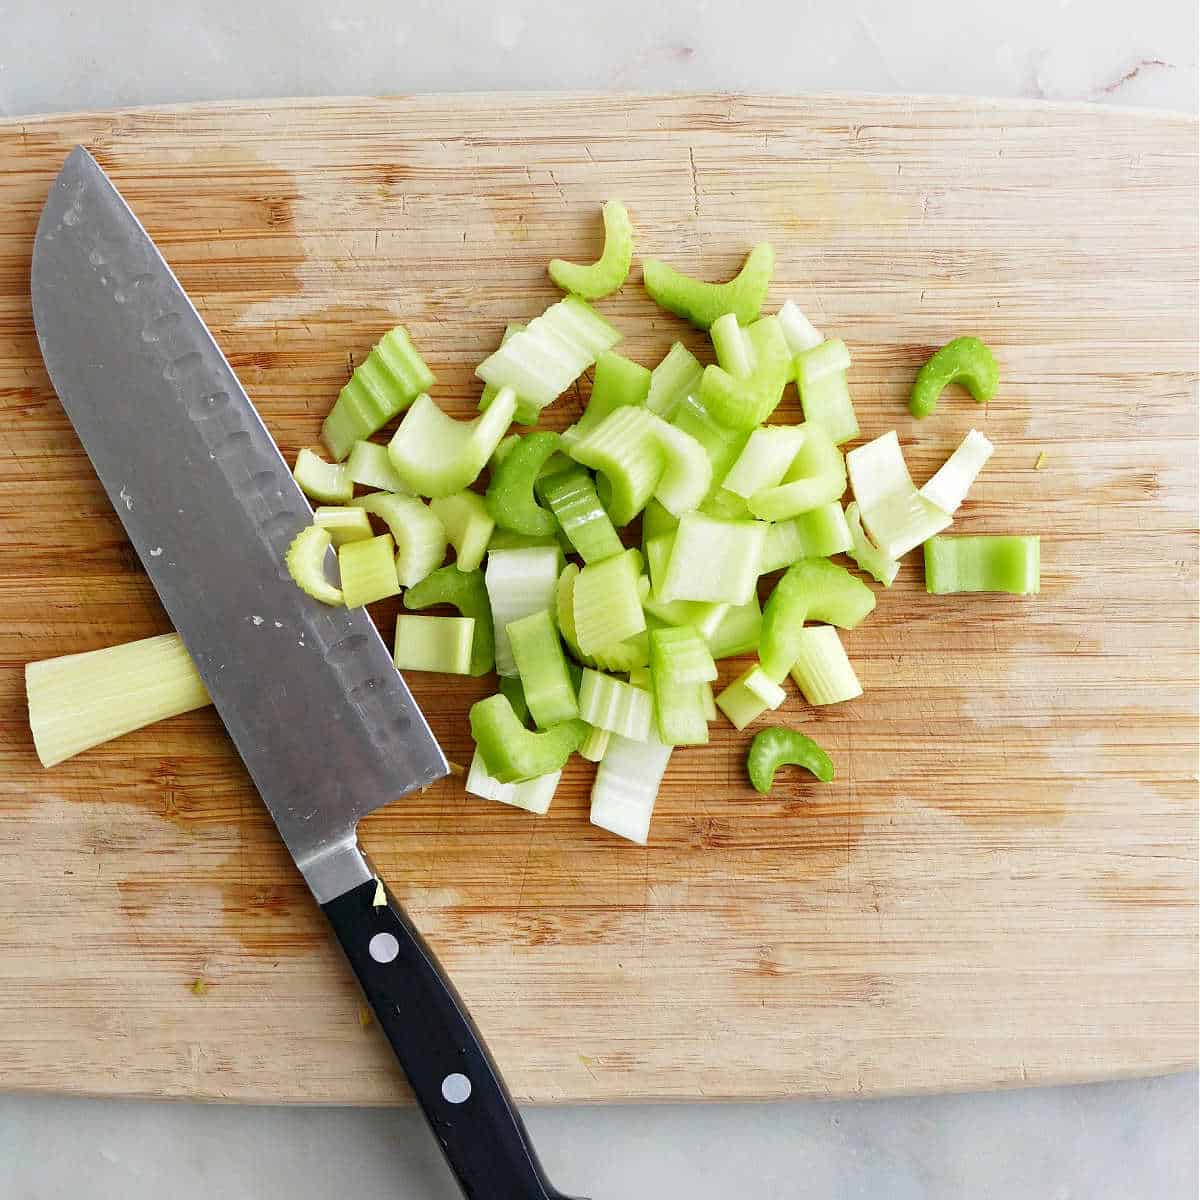 celery cut into slices on a cutting board with a chef's knife